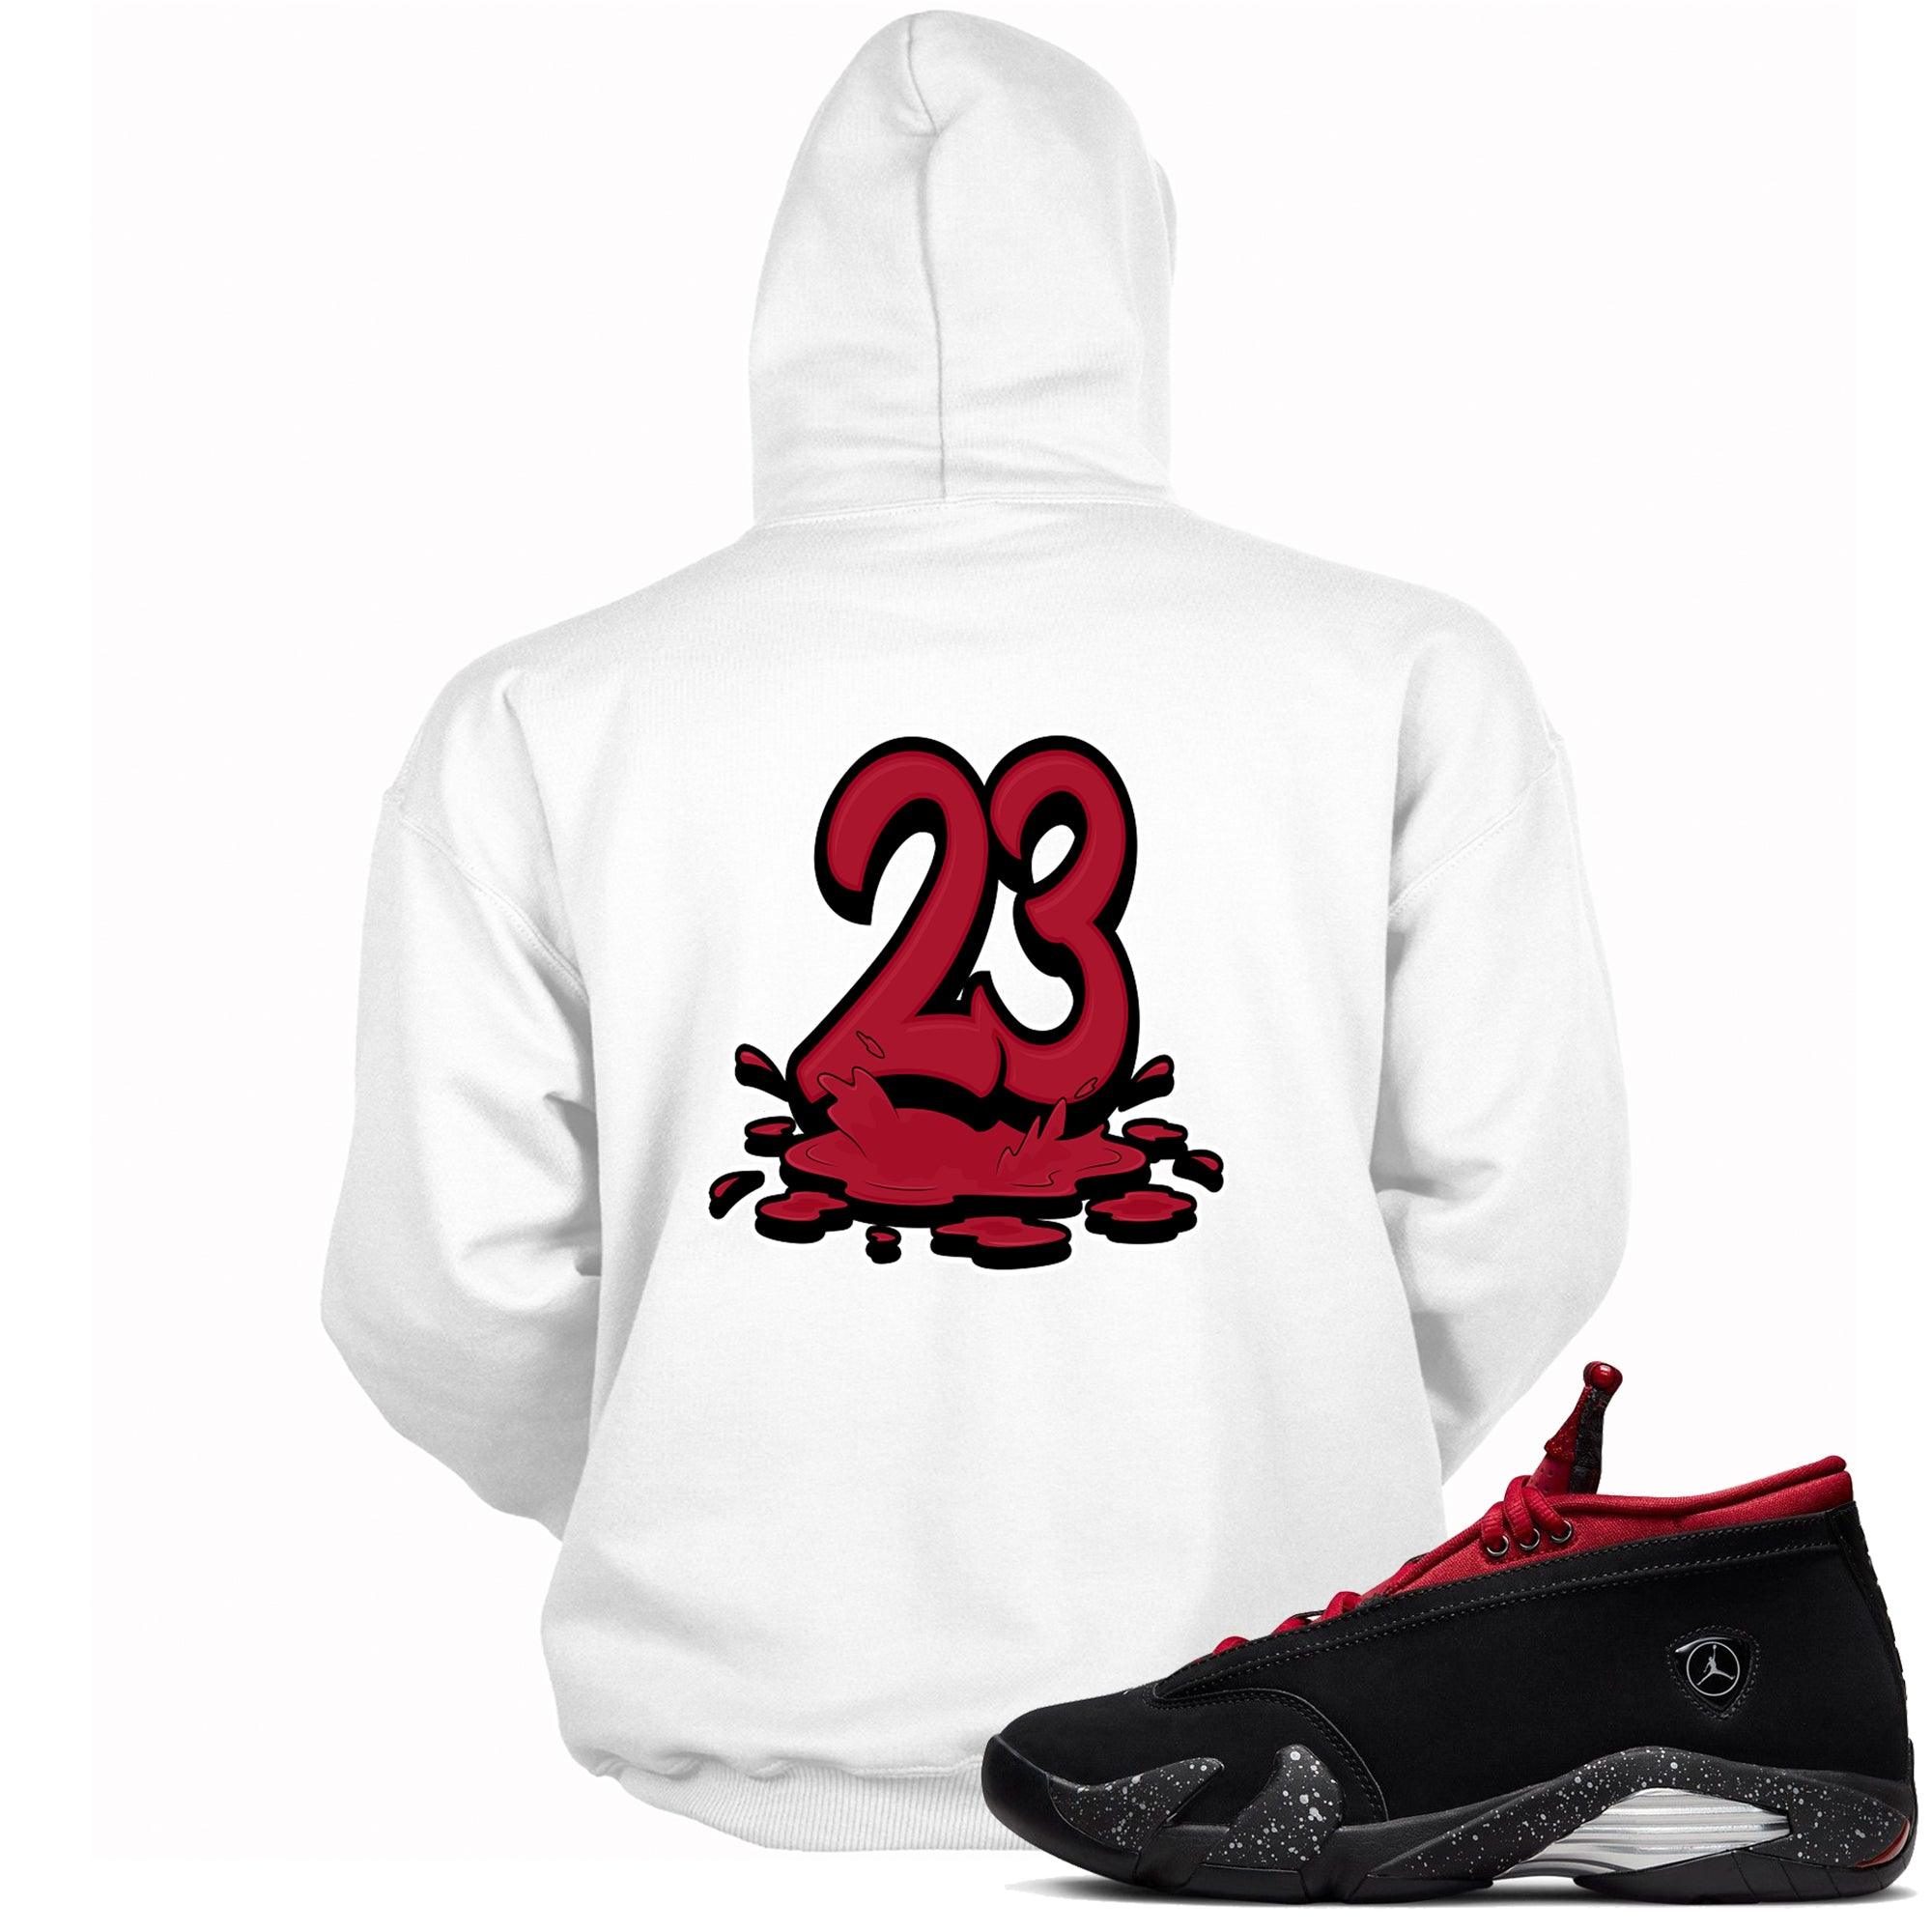 Number 23 Melting Hoodie AJ 14 Retro Low Red Lipstick Womens photo